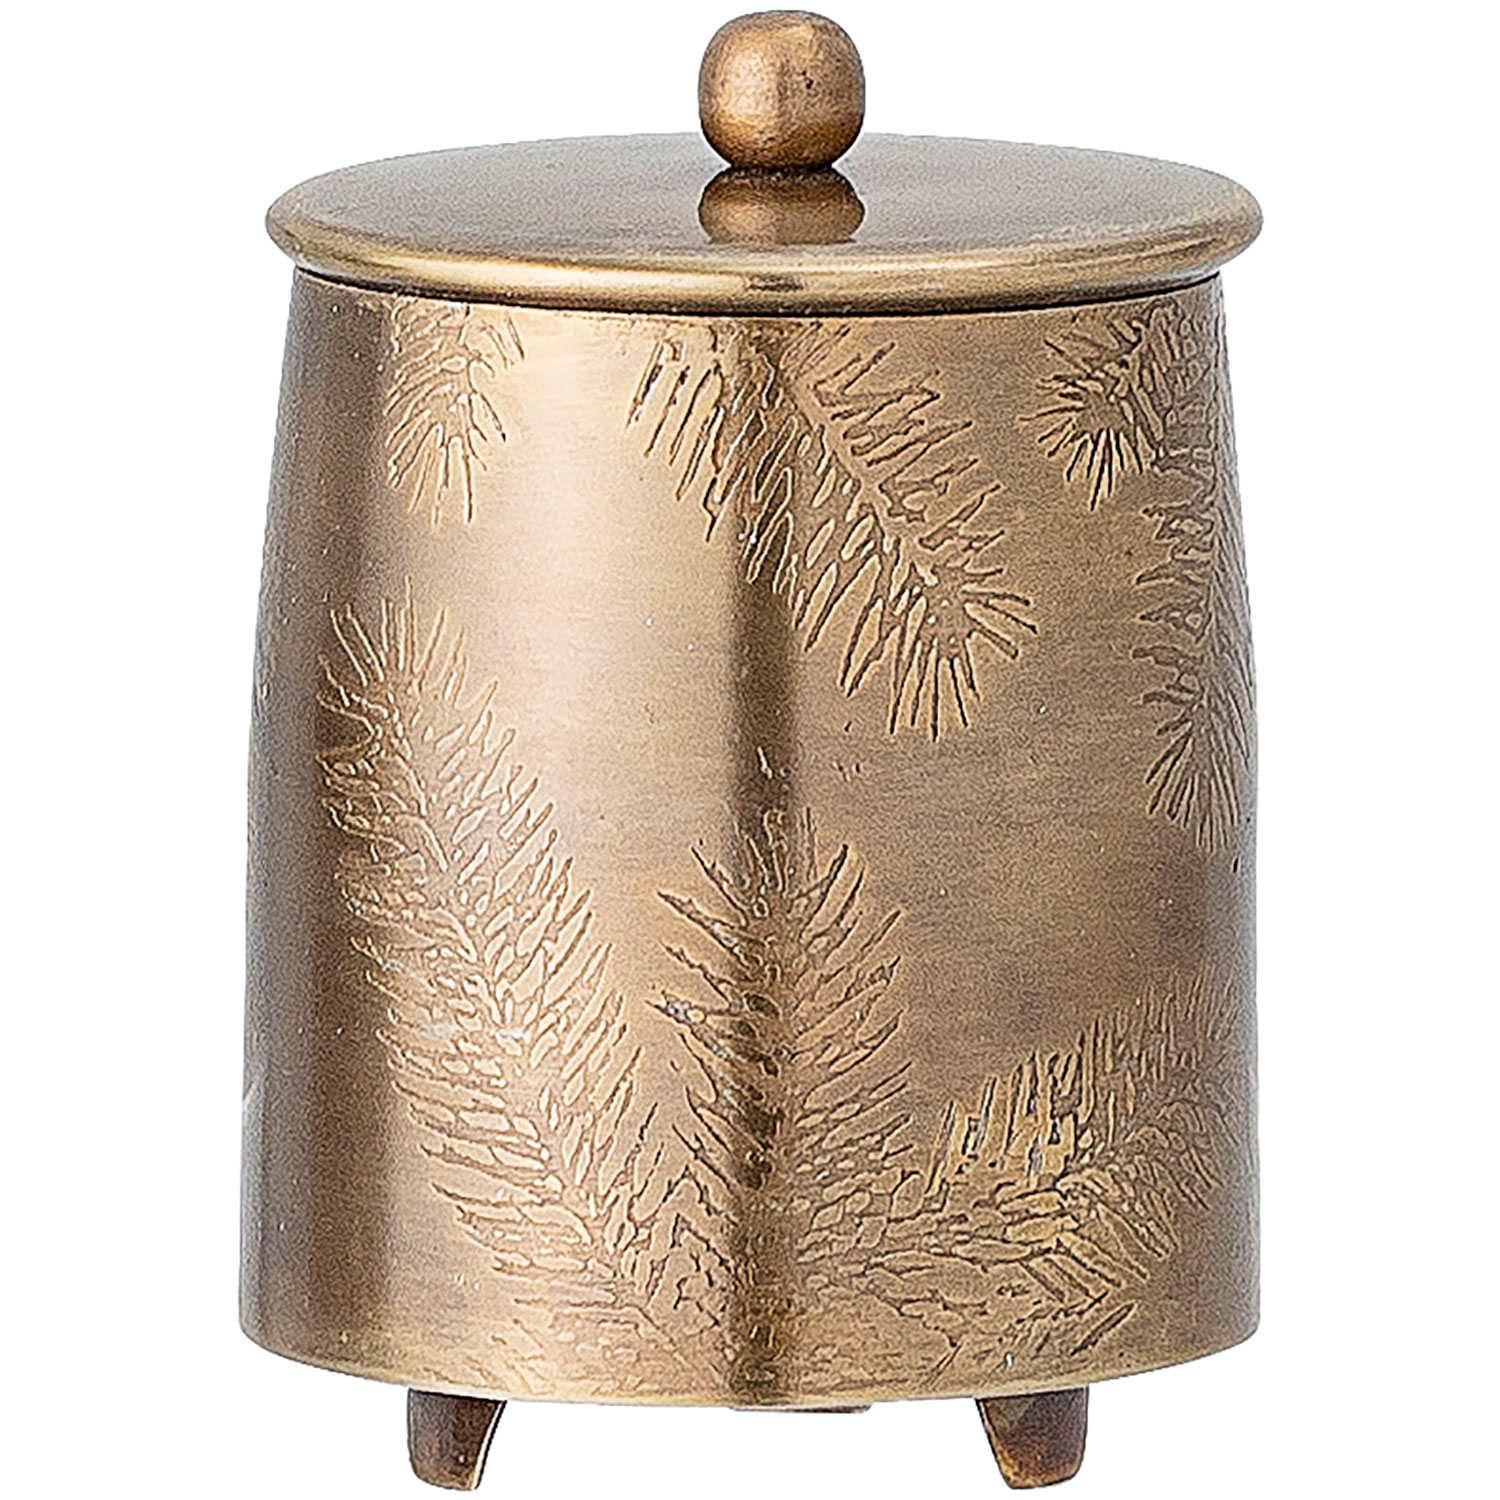 Wood with Antique Brass Canister